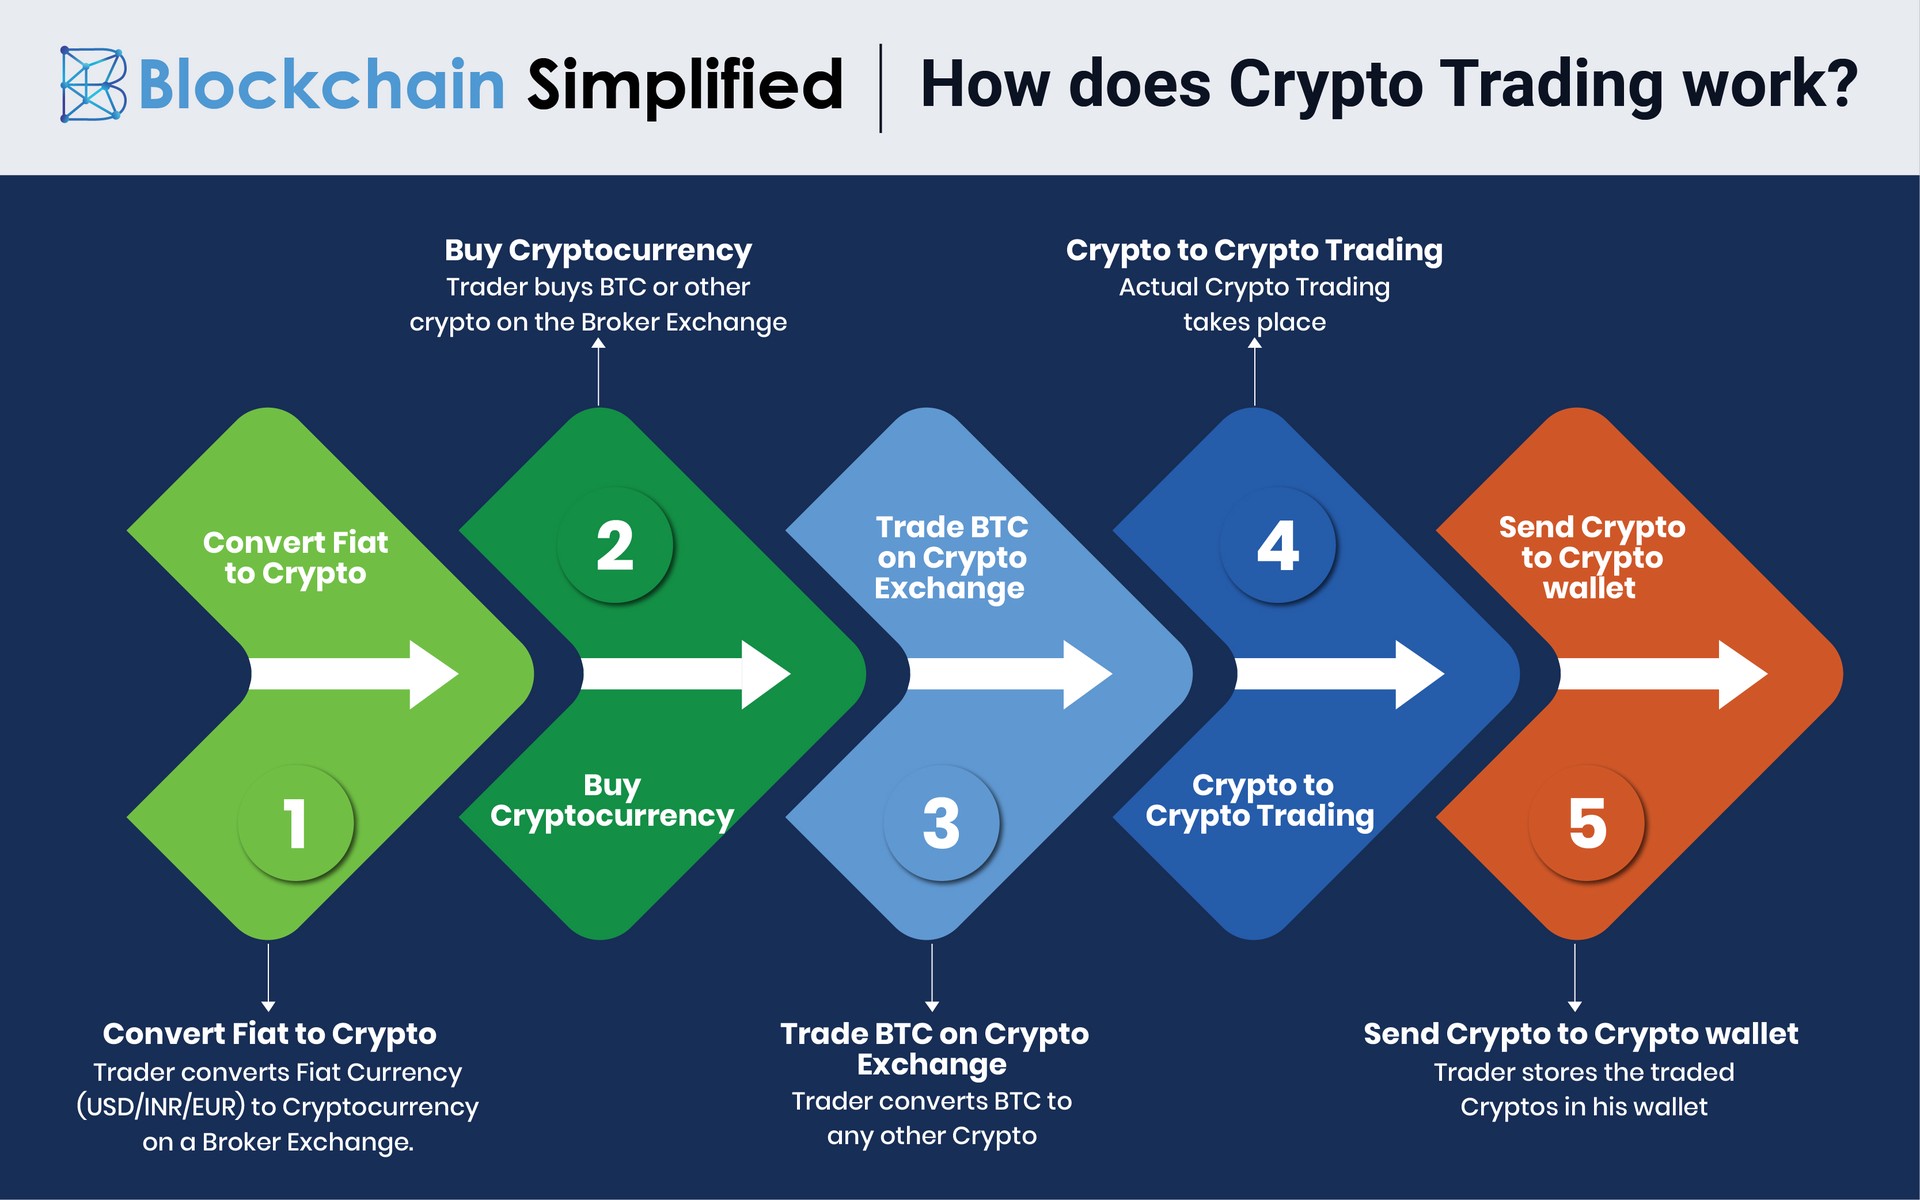 How Spot Trading Works in Crypto